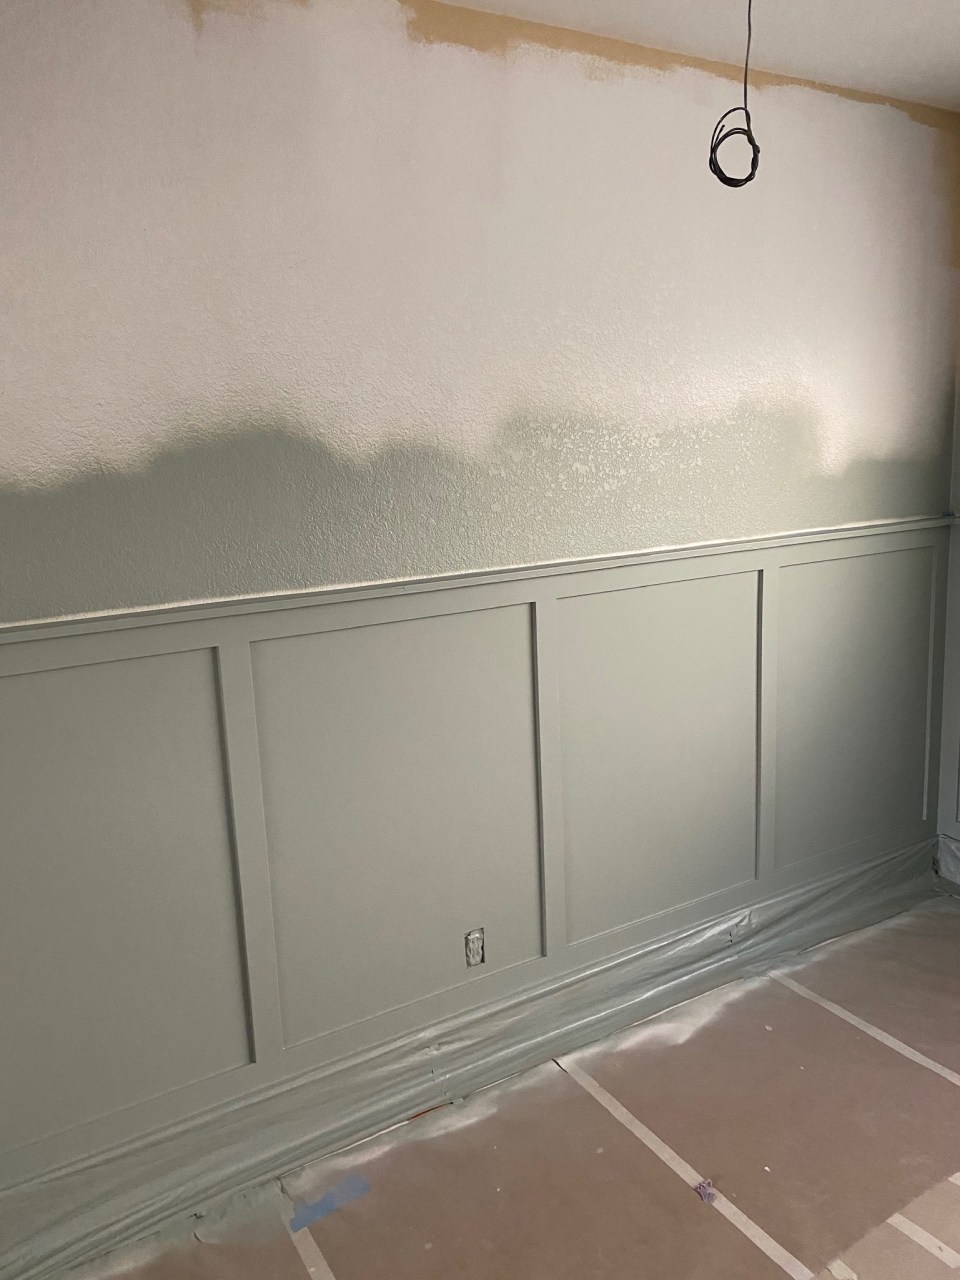 Painting the wainscotting SW Oyster Bay green